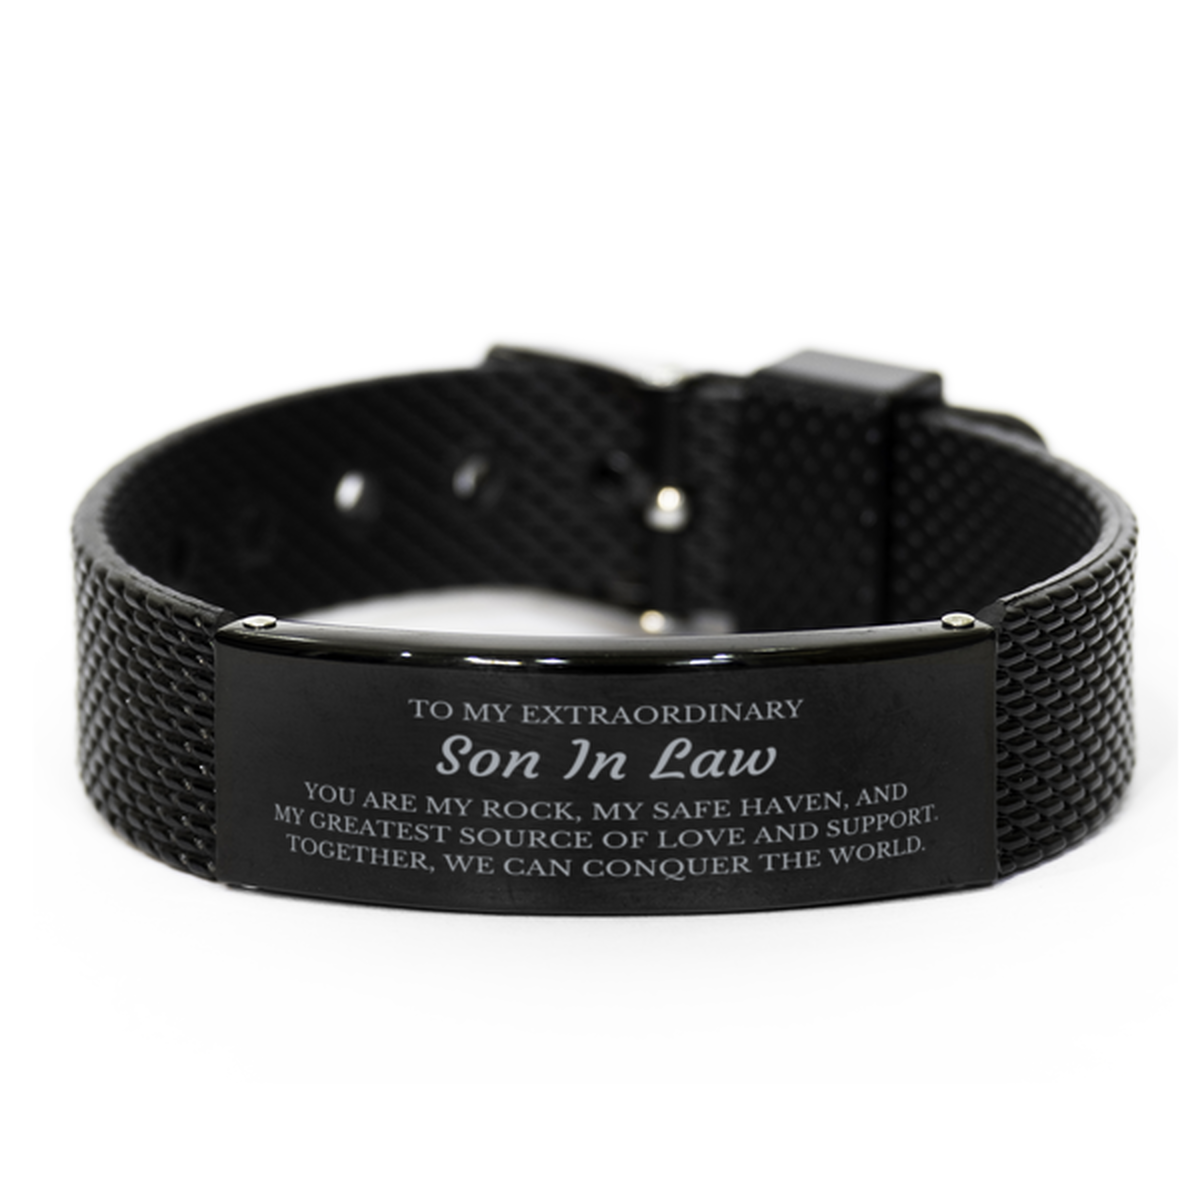 To My Extraordinary Son In Law Gifts, Together, we can conquer the world, Birthday Black Shark Mesh Bracelet For Son In Law, Christmas Gifts For Son In Law